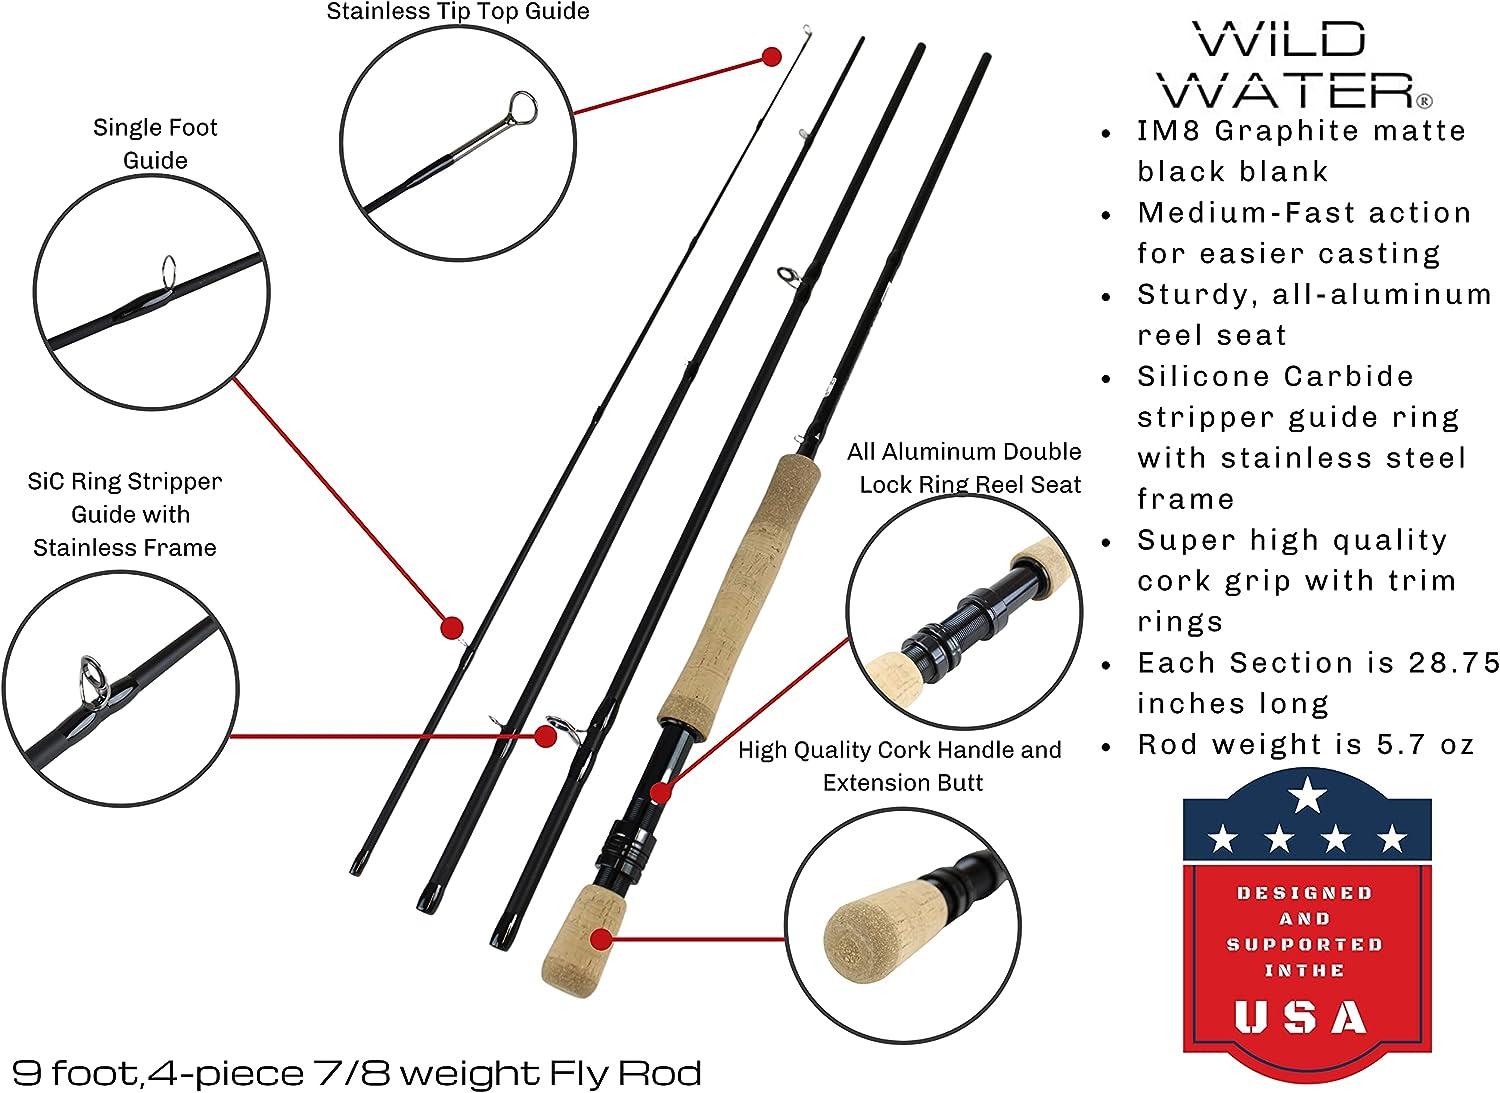 Wild Water Fly Fishing 9 Foot, 4-Piece, 7/8 Weight Fly Rod Complete Fly  Fishing Rod and Reel Combo Starter Package